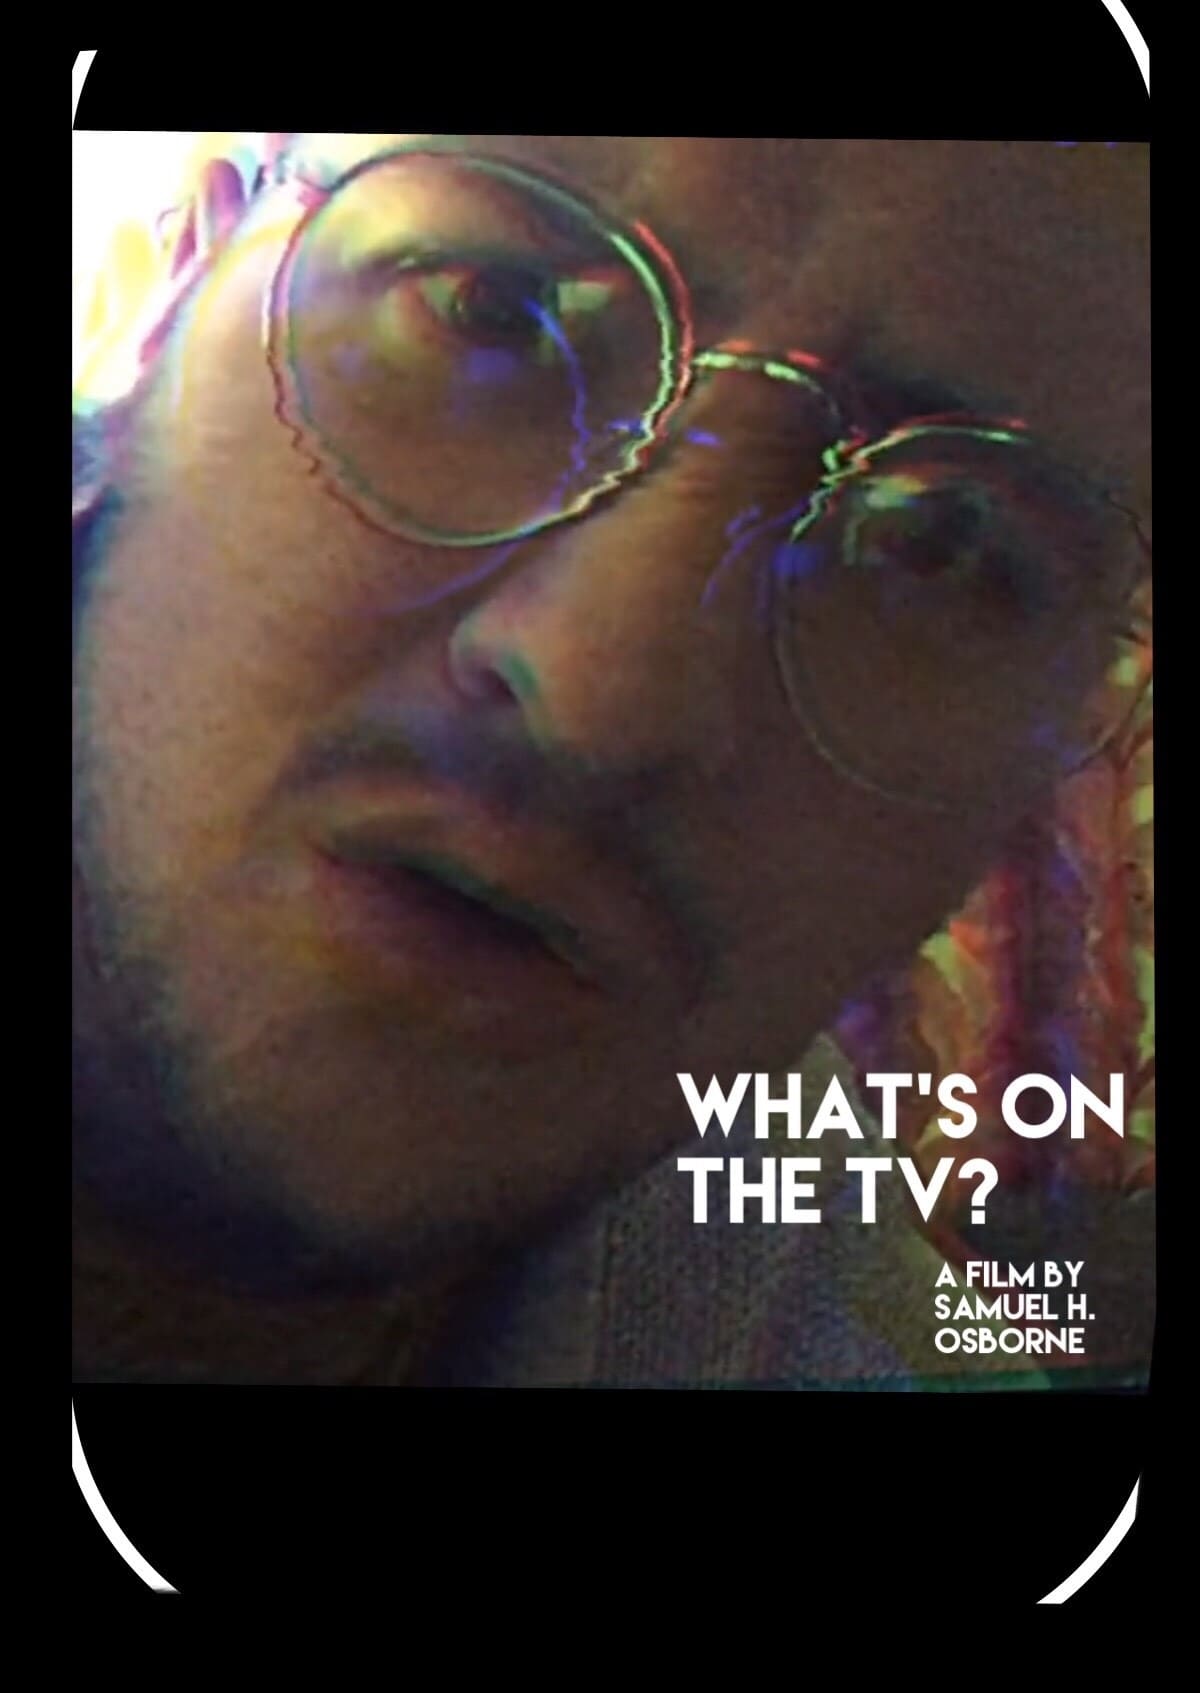 What's on the TV?